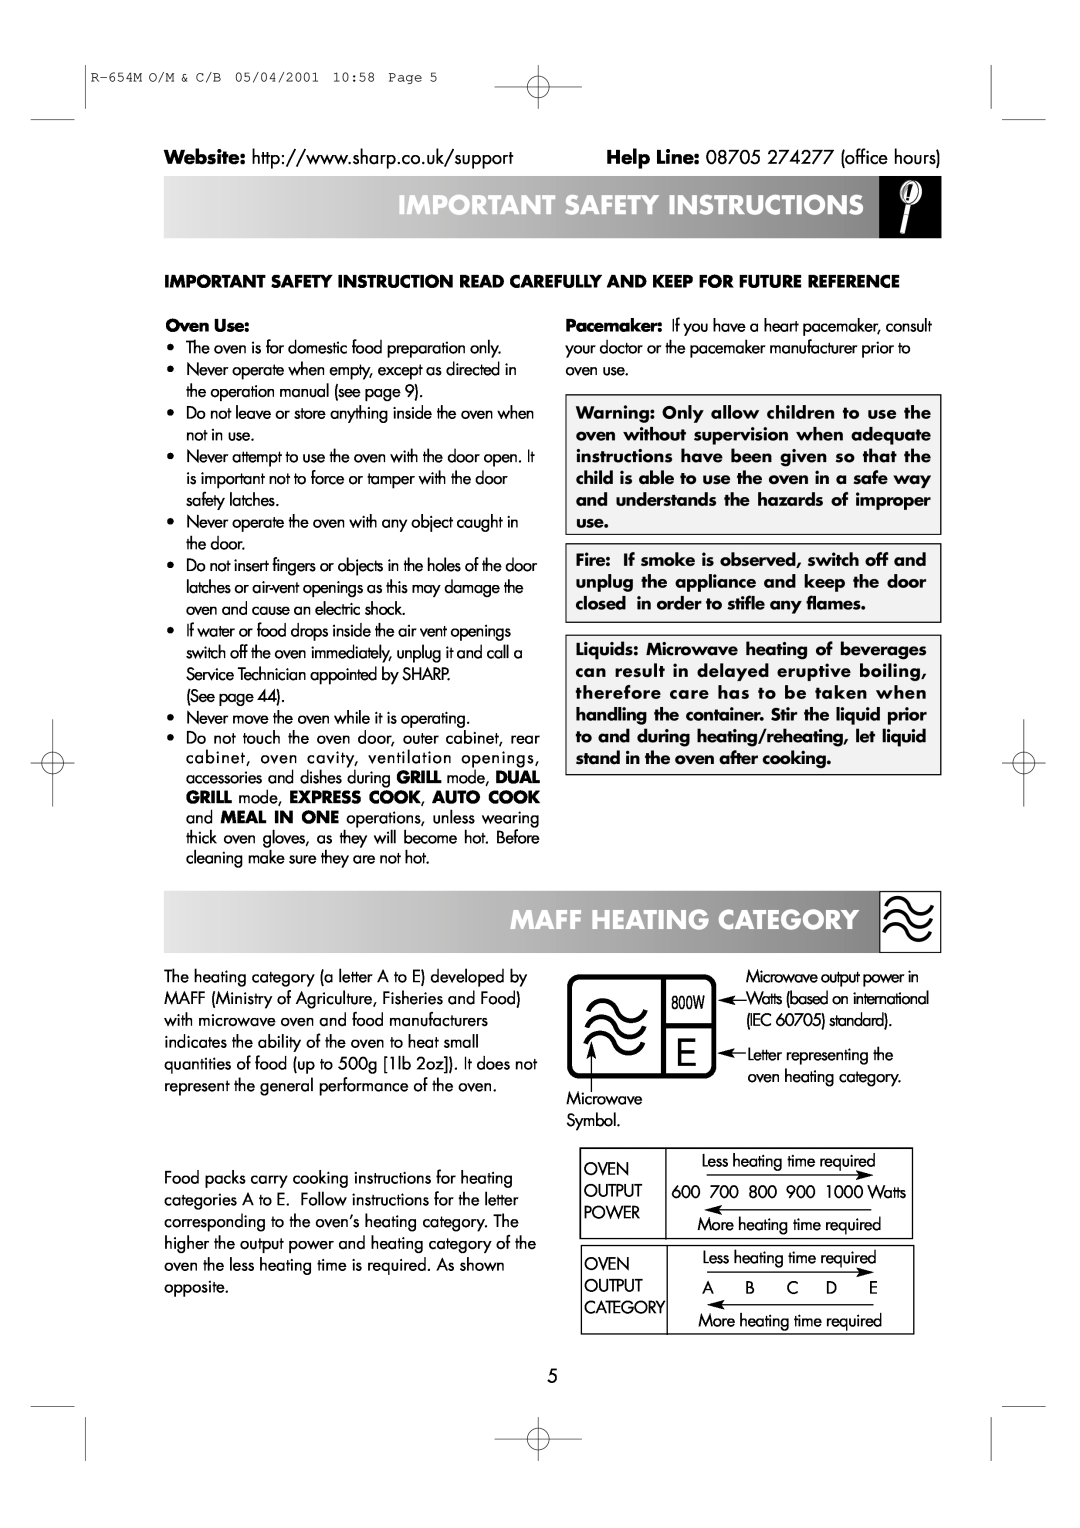 Sharp R-654M operation manual Important Safetyinstructions, Maffheating Category, Help Line 08705 274277 office hours 